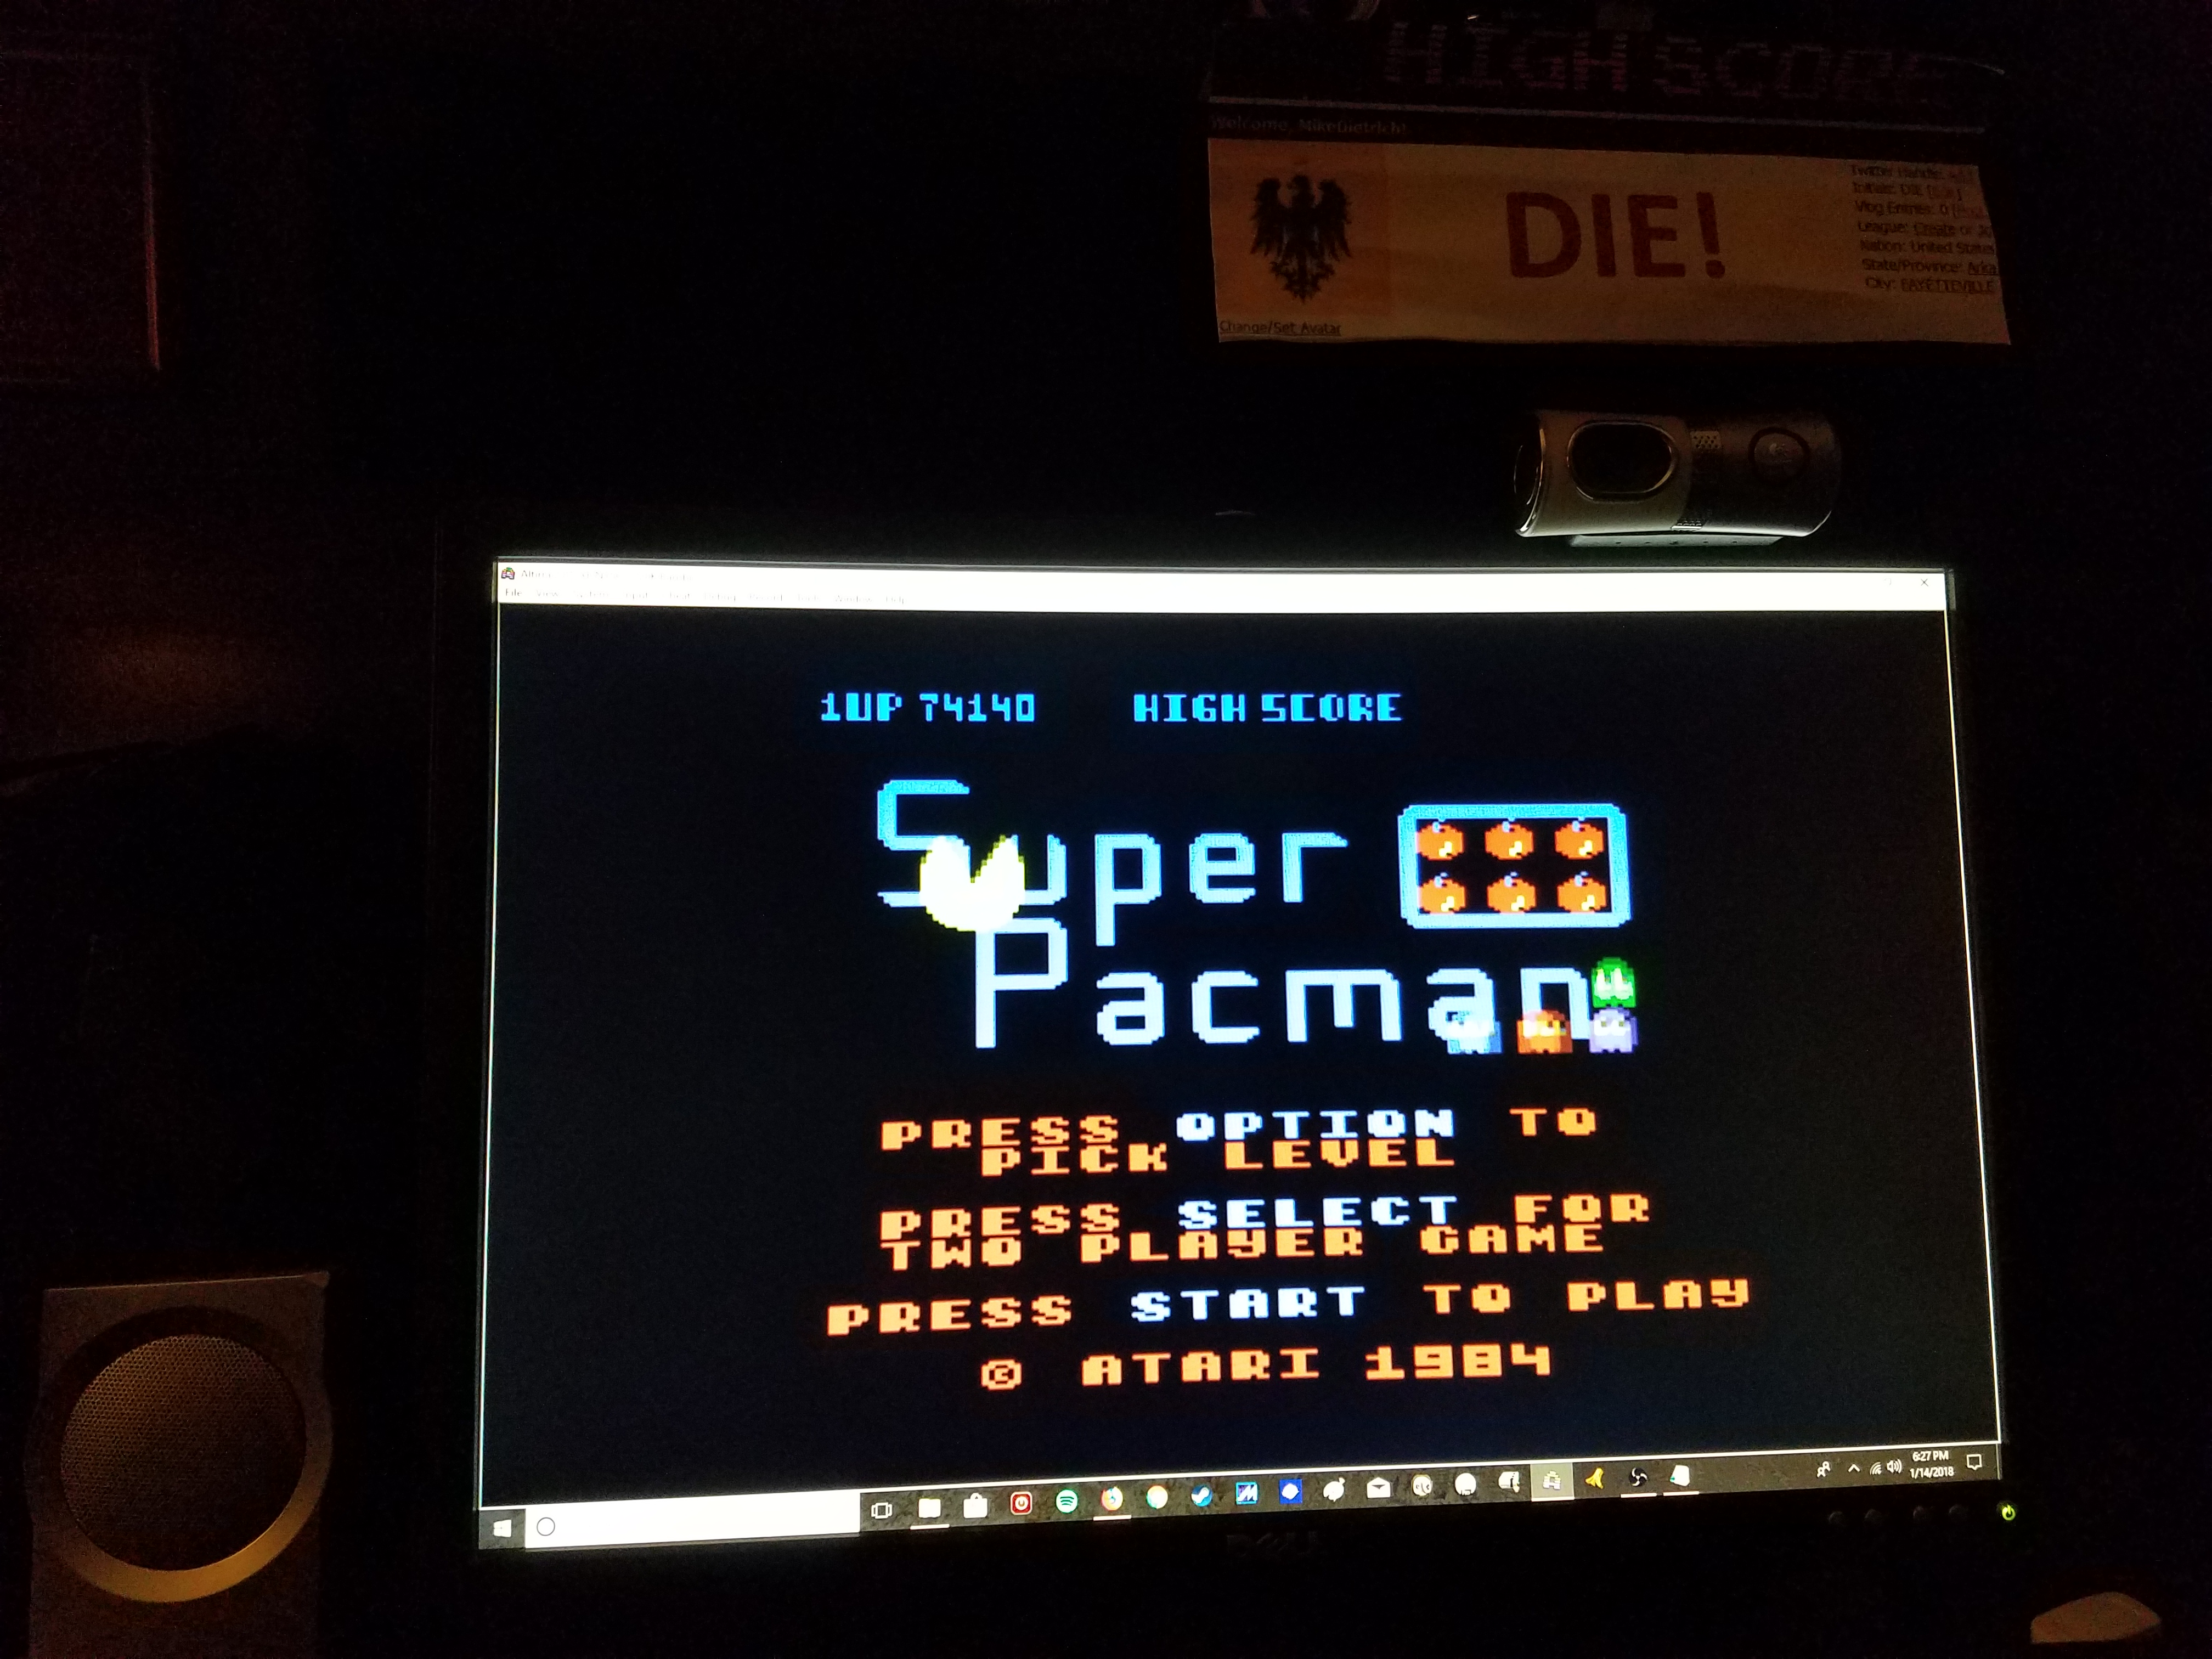 MikeDietrich: Super Pacman [Default settings] (Atari 400/800/XL/XE Emulated) 74,140 points on 2018-01-14 17:37:03